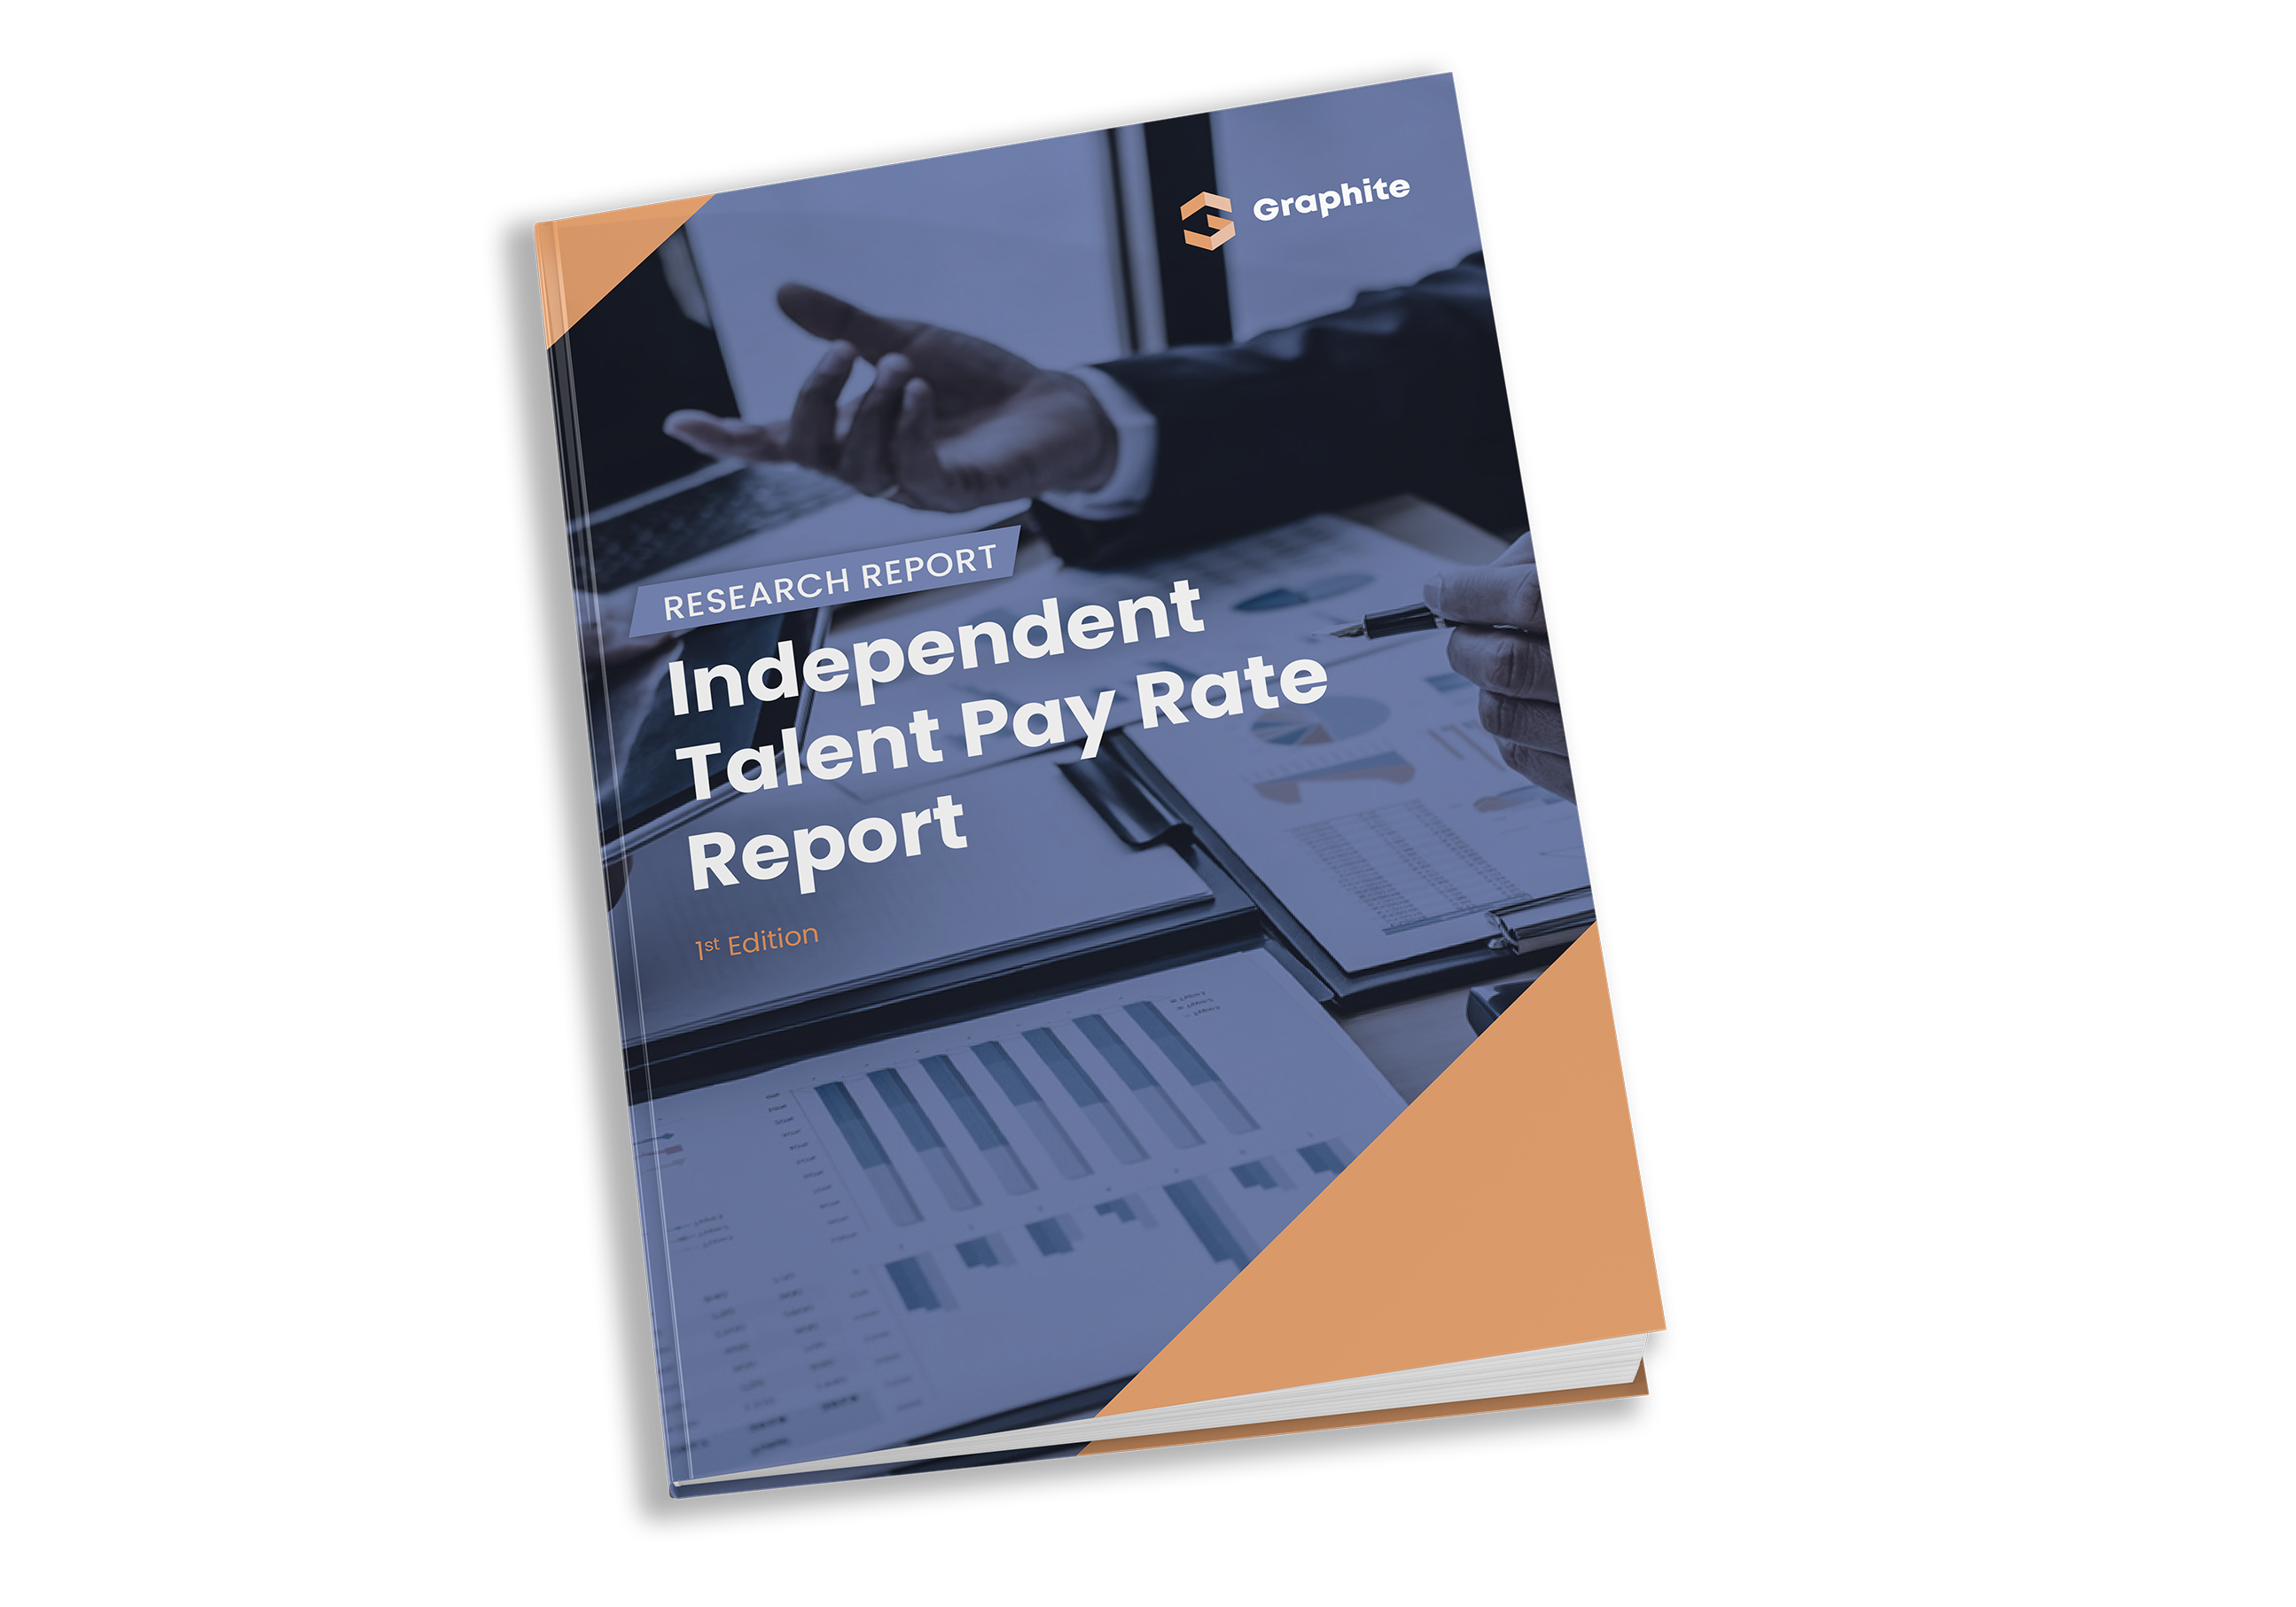 Graphite-Independent Talent Pay Rate Report-1st Edition